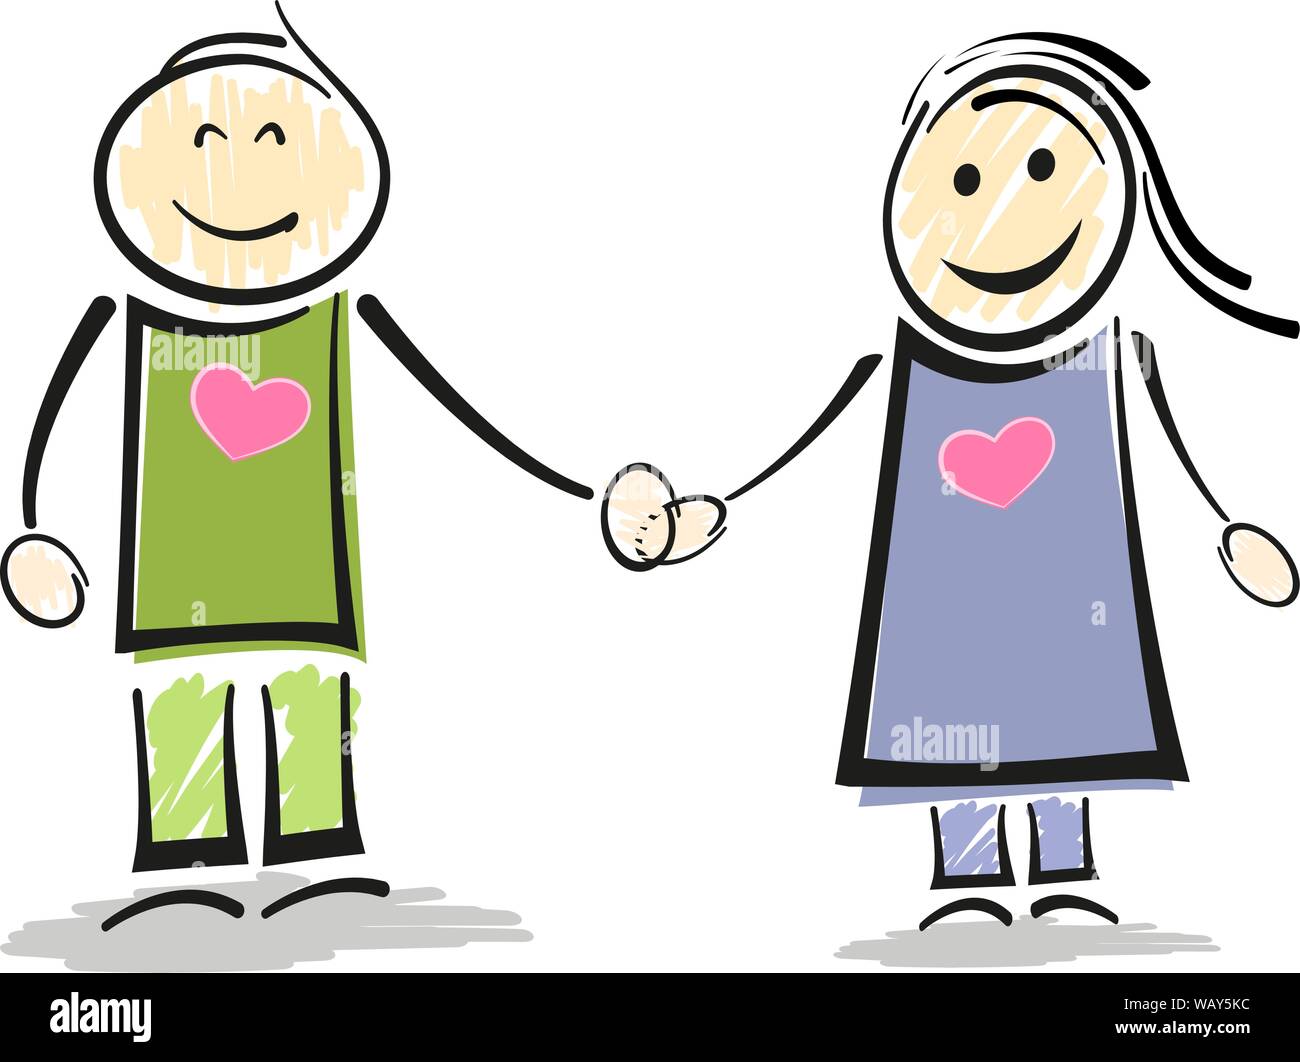 smiling stick figure couple holding hands vector illustration Stock Vector